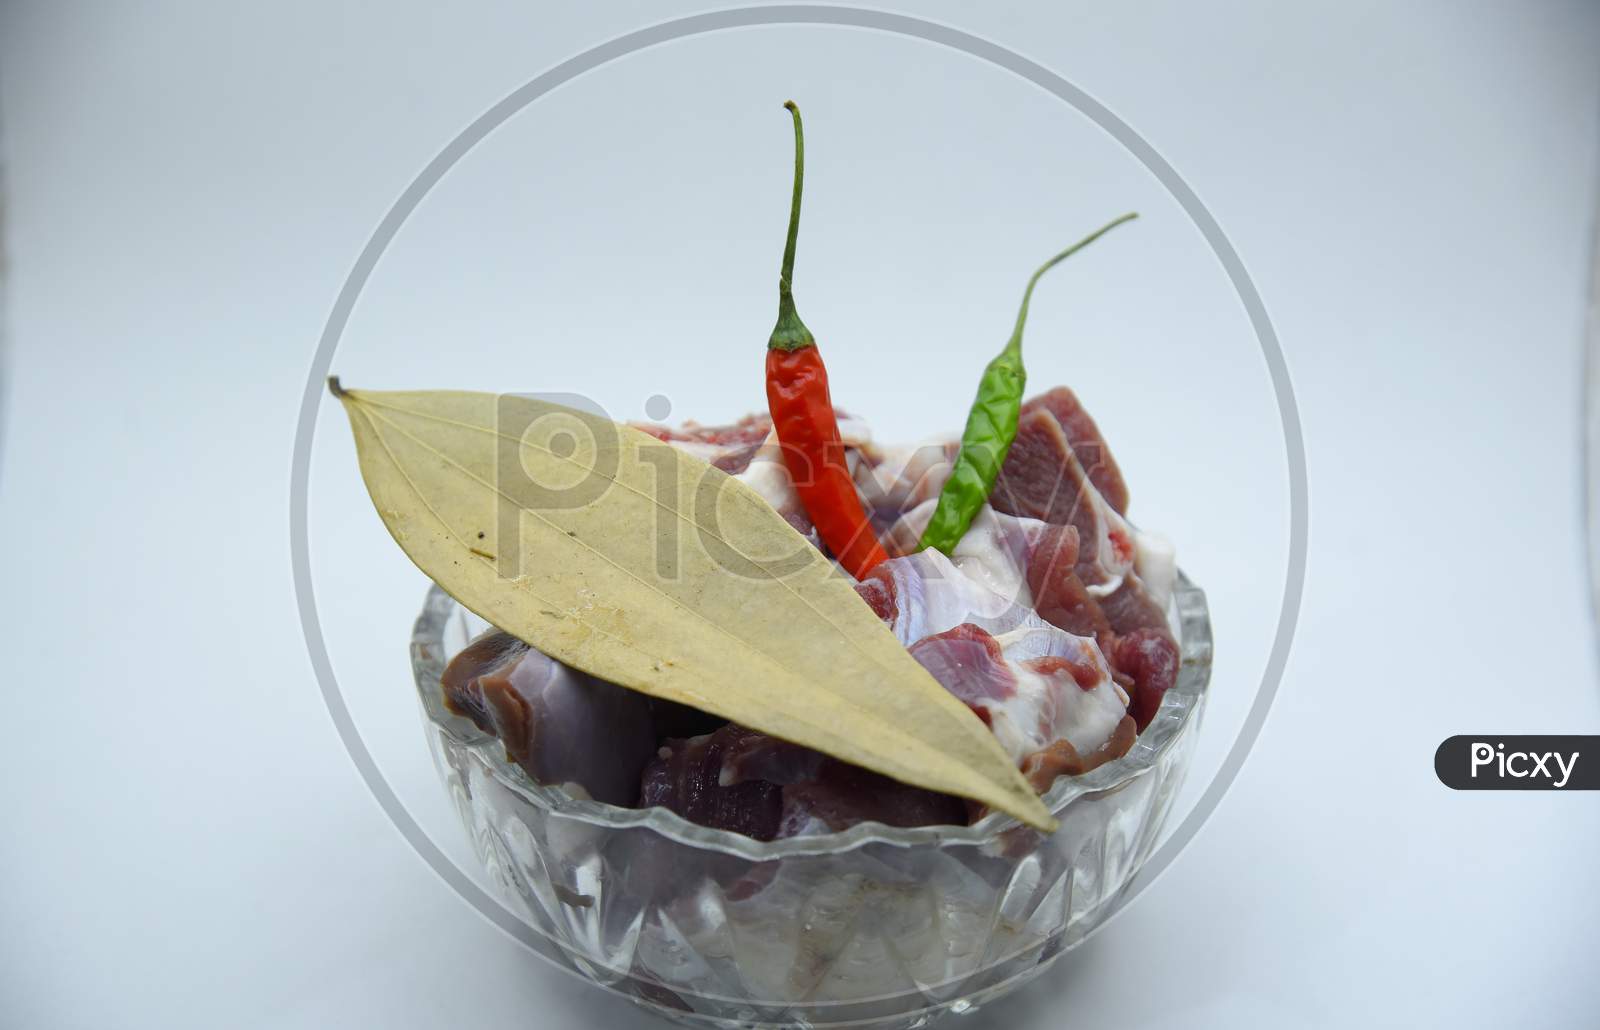 Chopped raw meat on black background , top view . raw Lamb and mutton meat isolated.